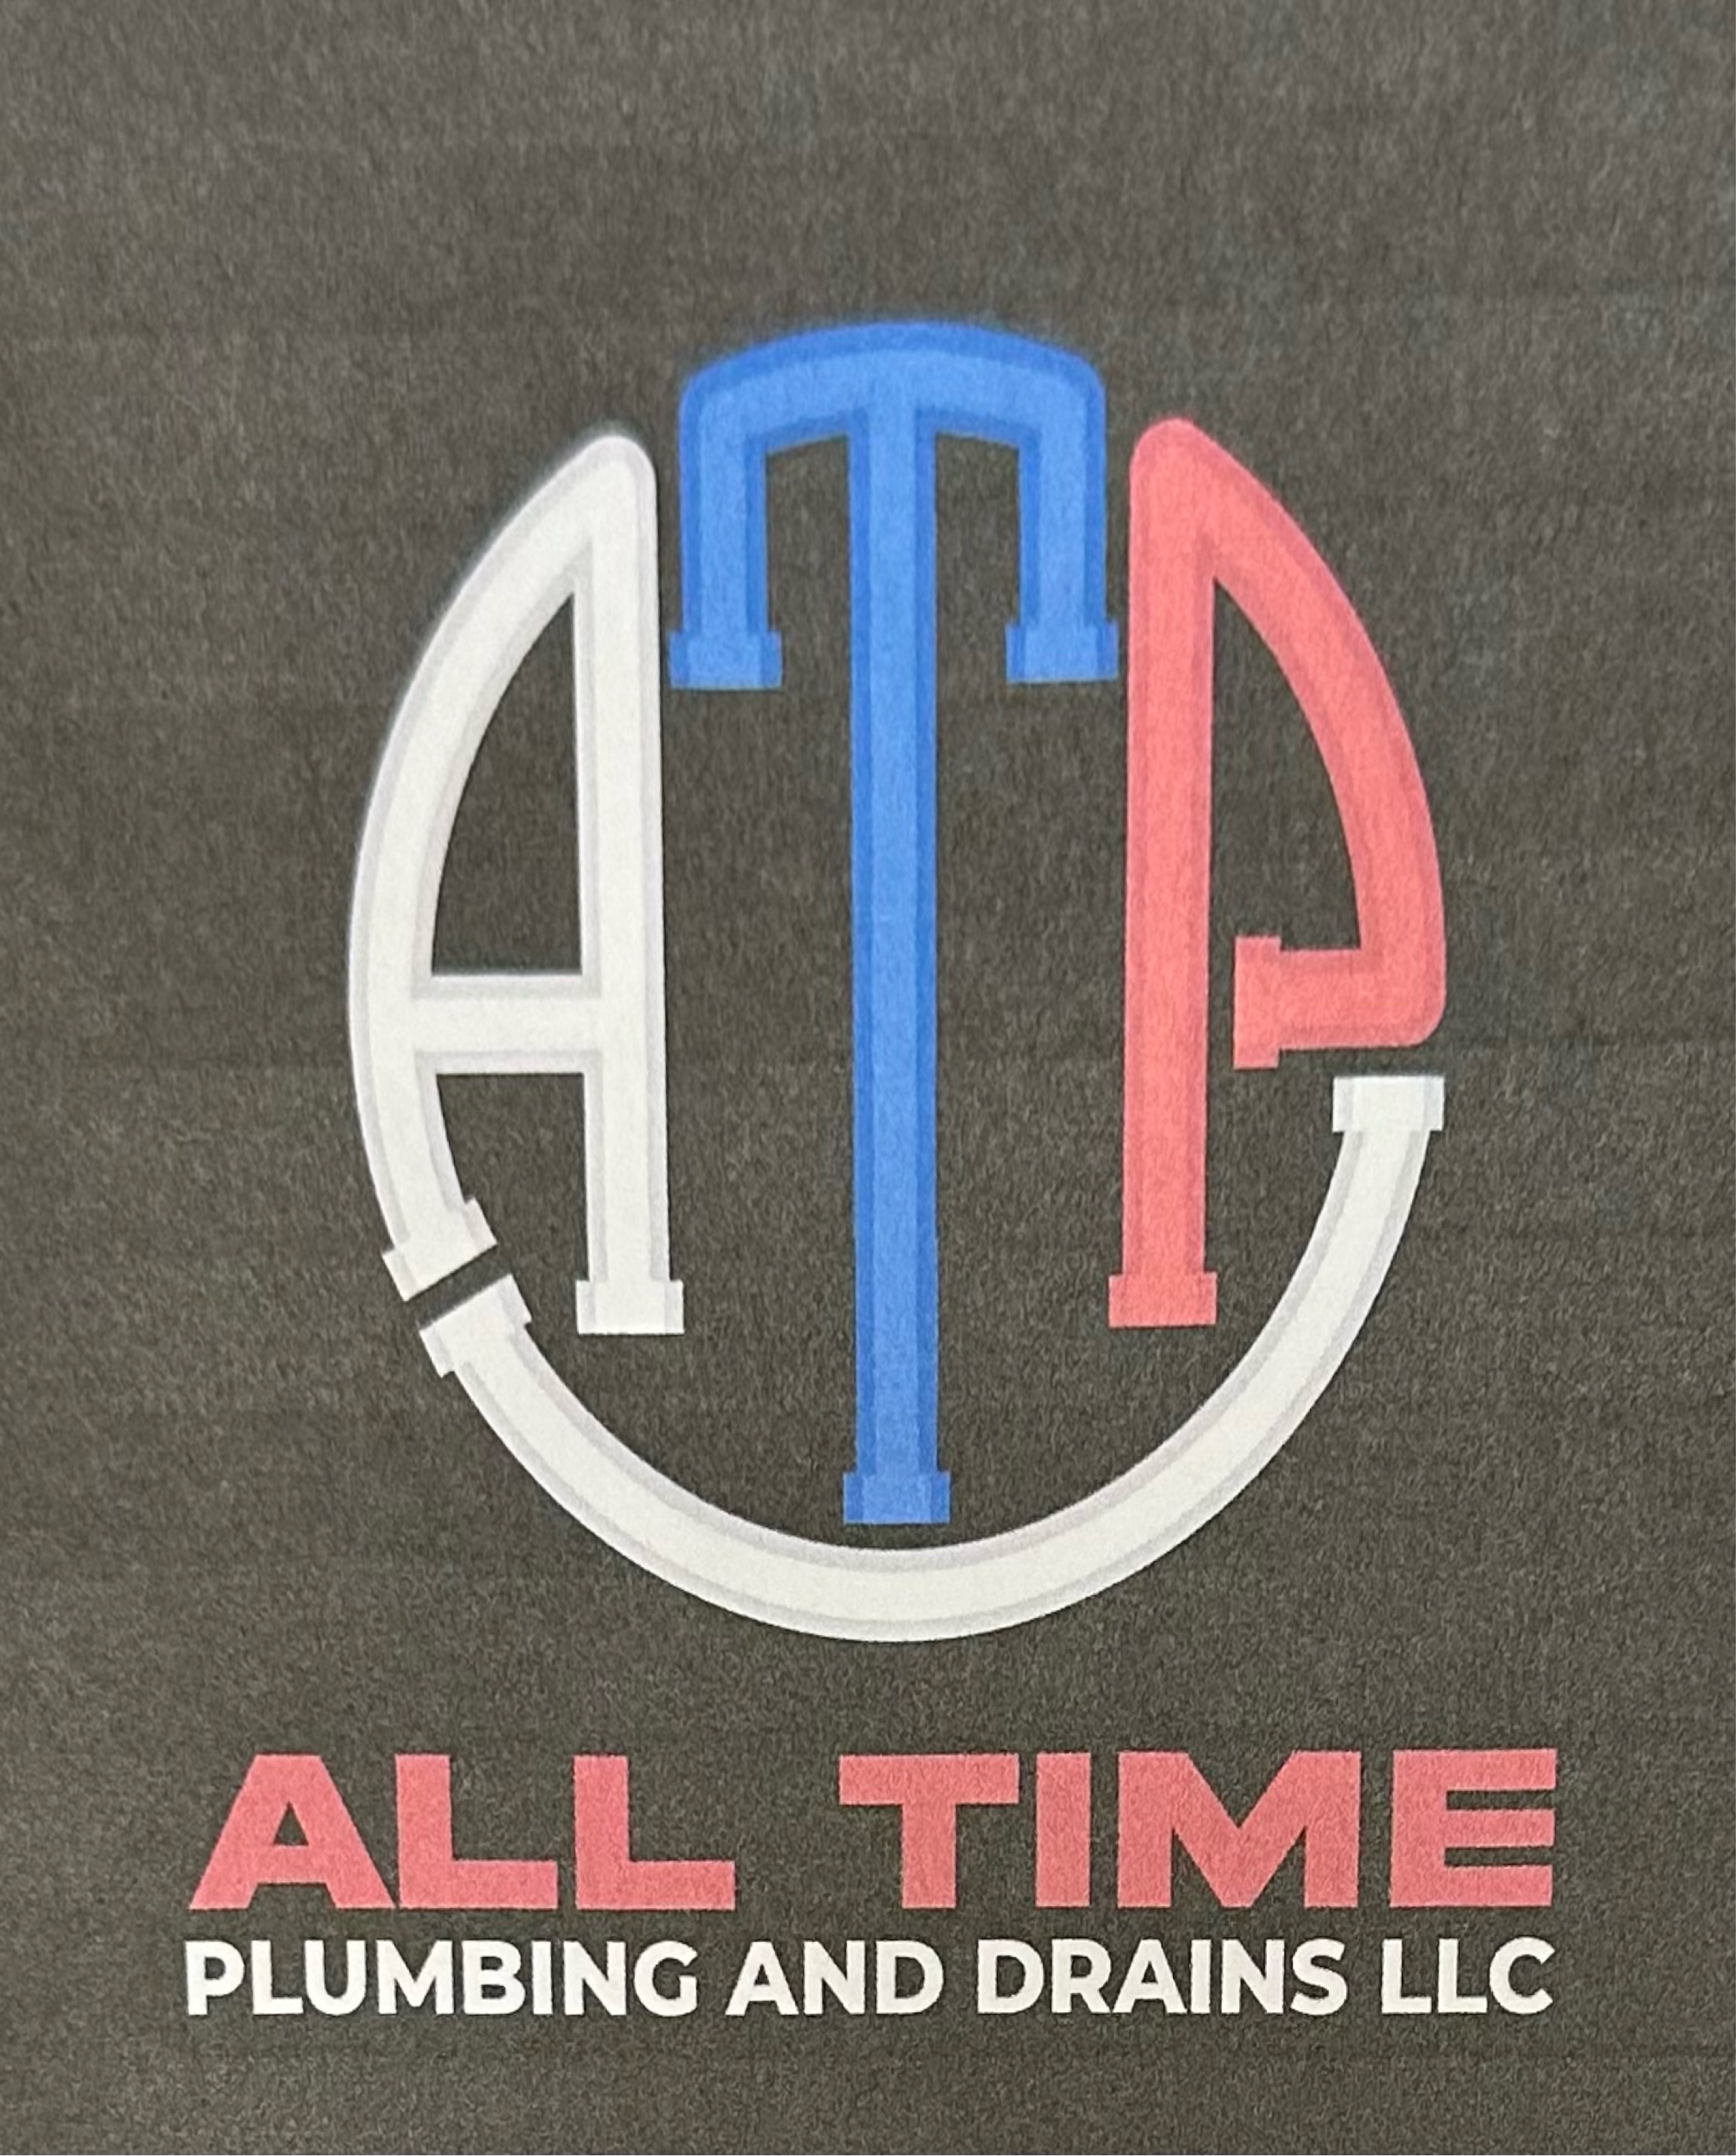 All Time Plumbing and Drains LLC Logo